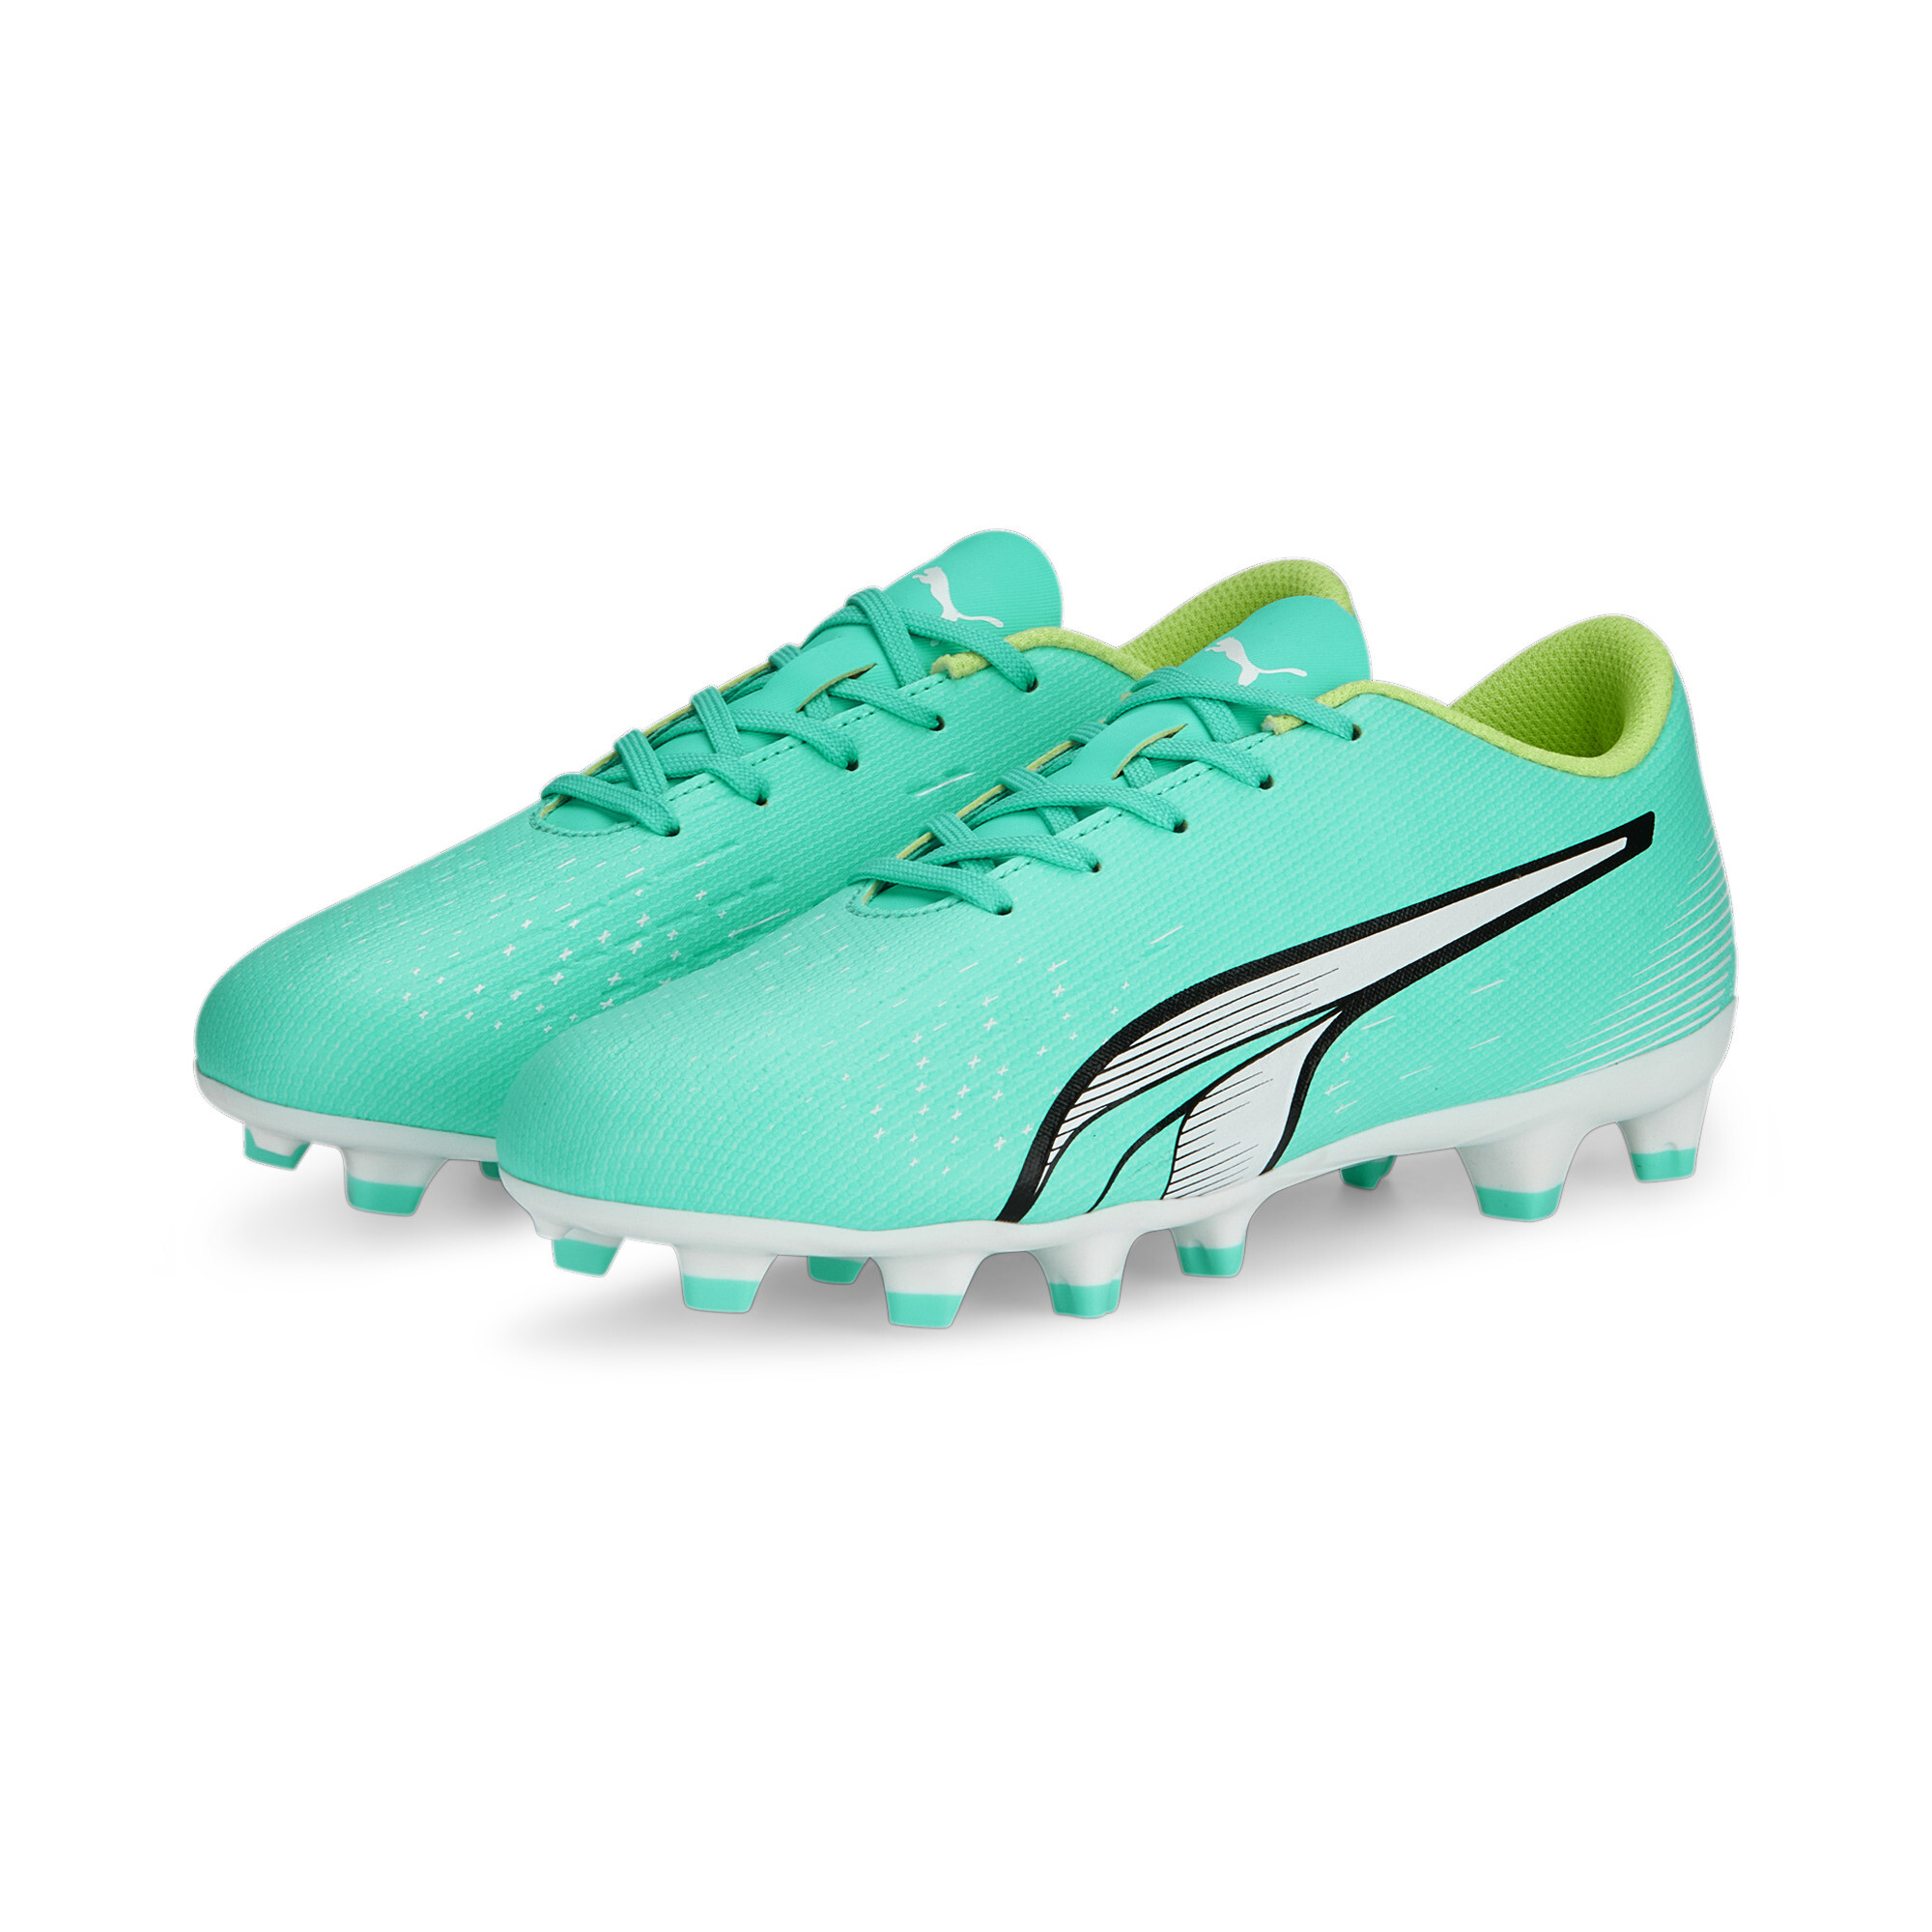 PUMA ULTRA Play FG/AG Football Boots Youth In Green, Size EU 29